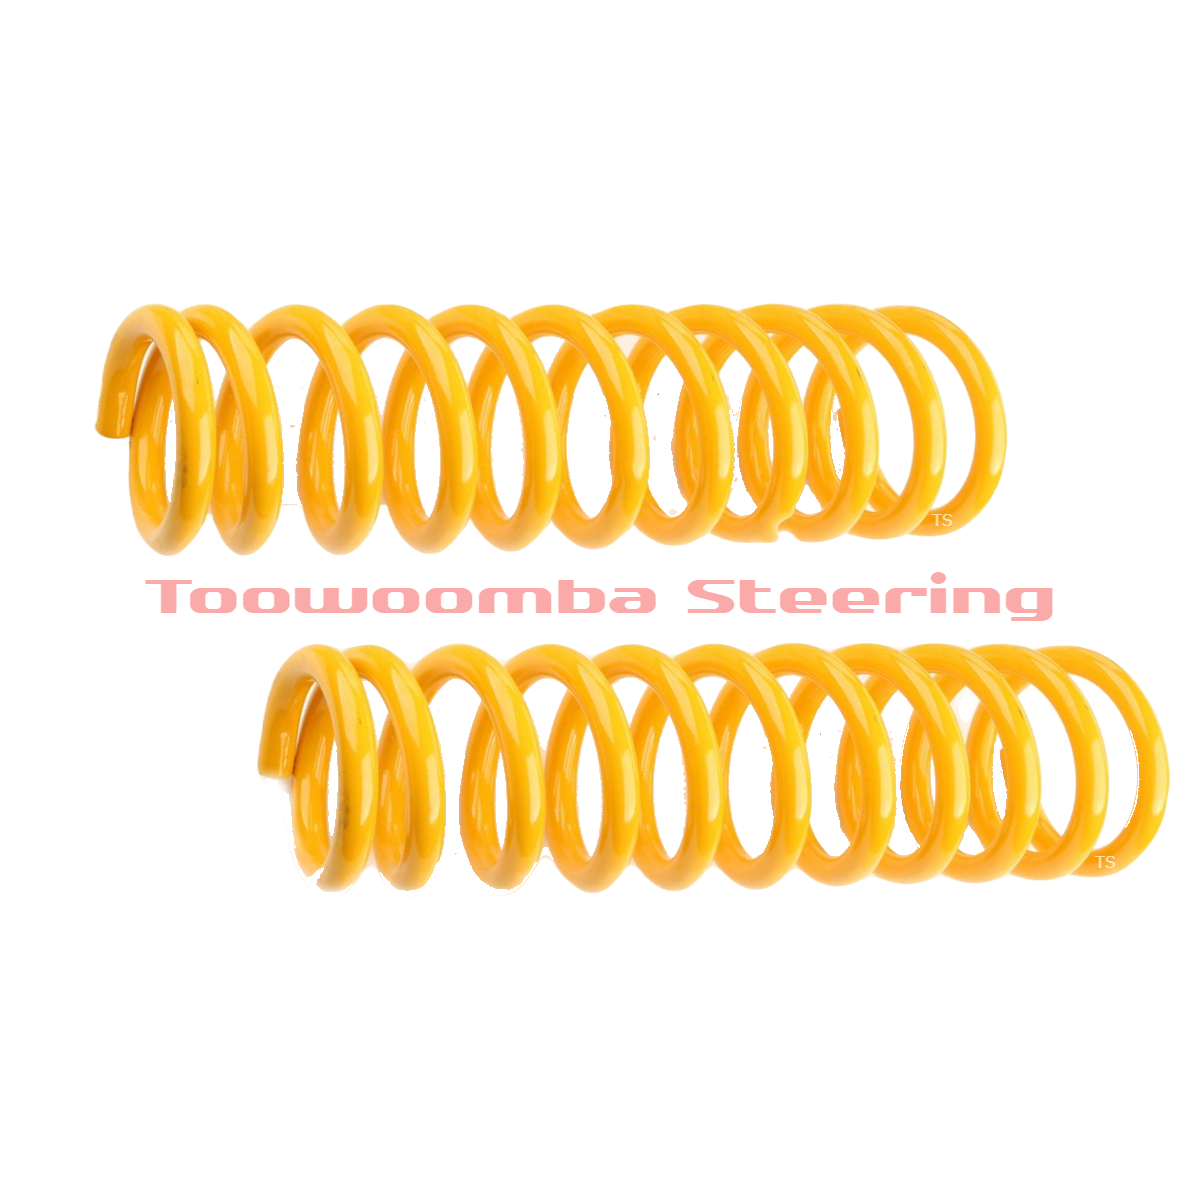 Front Lowered King Springs - Ideal for -  Mazda 6 GJ PETROL- SEDAN & WAGON 12/12 – 6/16, Mazda 6 GL PETROL – SEDAN & WAGON 7/16 – 19 - (KMFL-50)